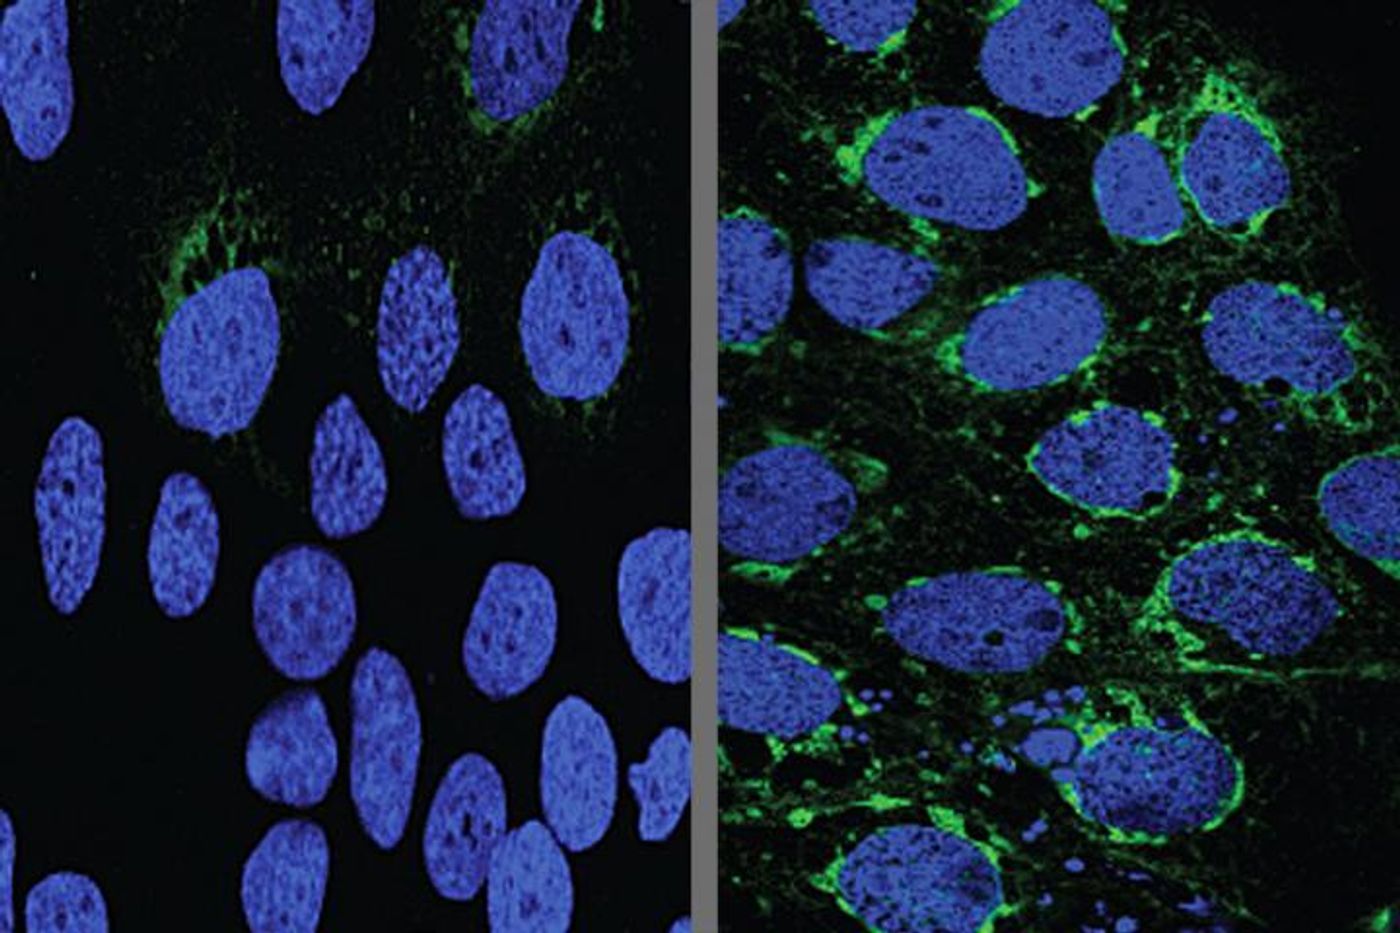 Human placental cells (blue) infected with Zika virus (green) responded to the malaria drug chloroquine (left). Credit: Bin Cao